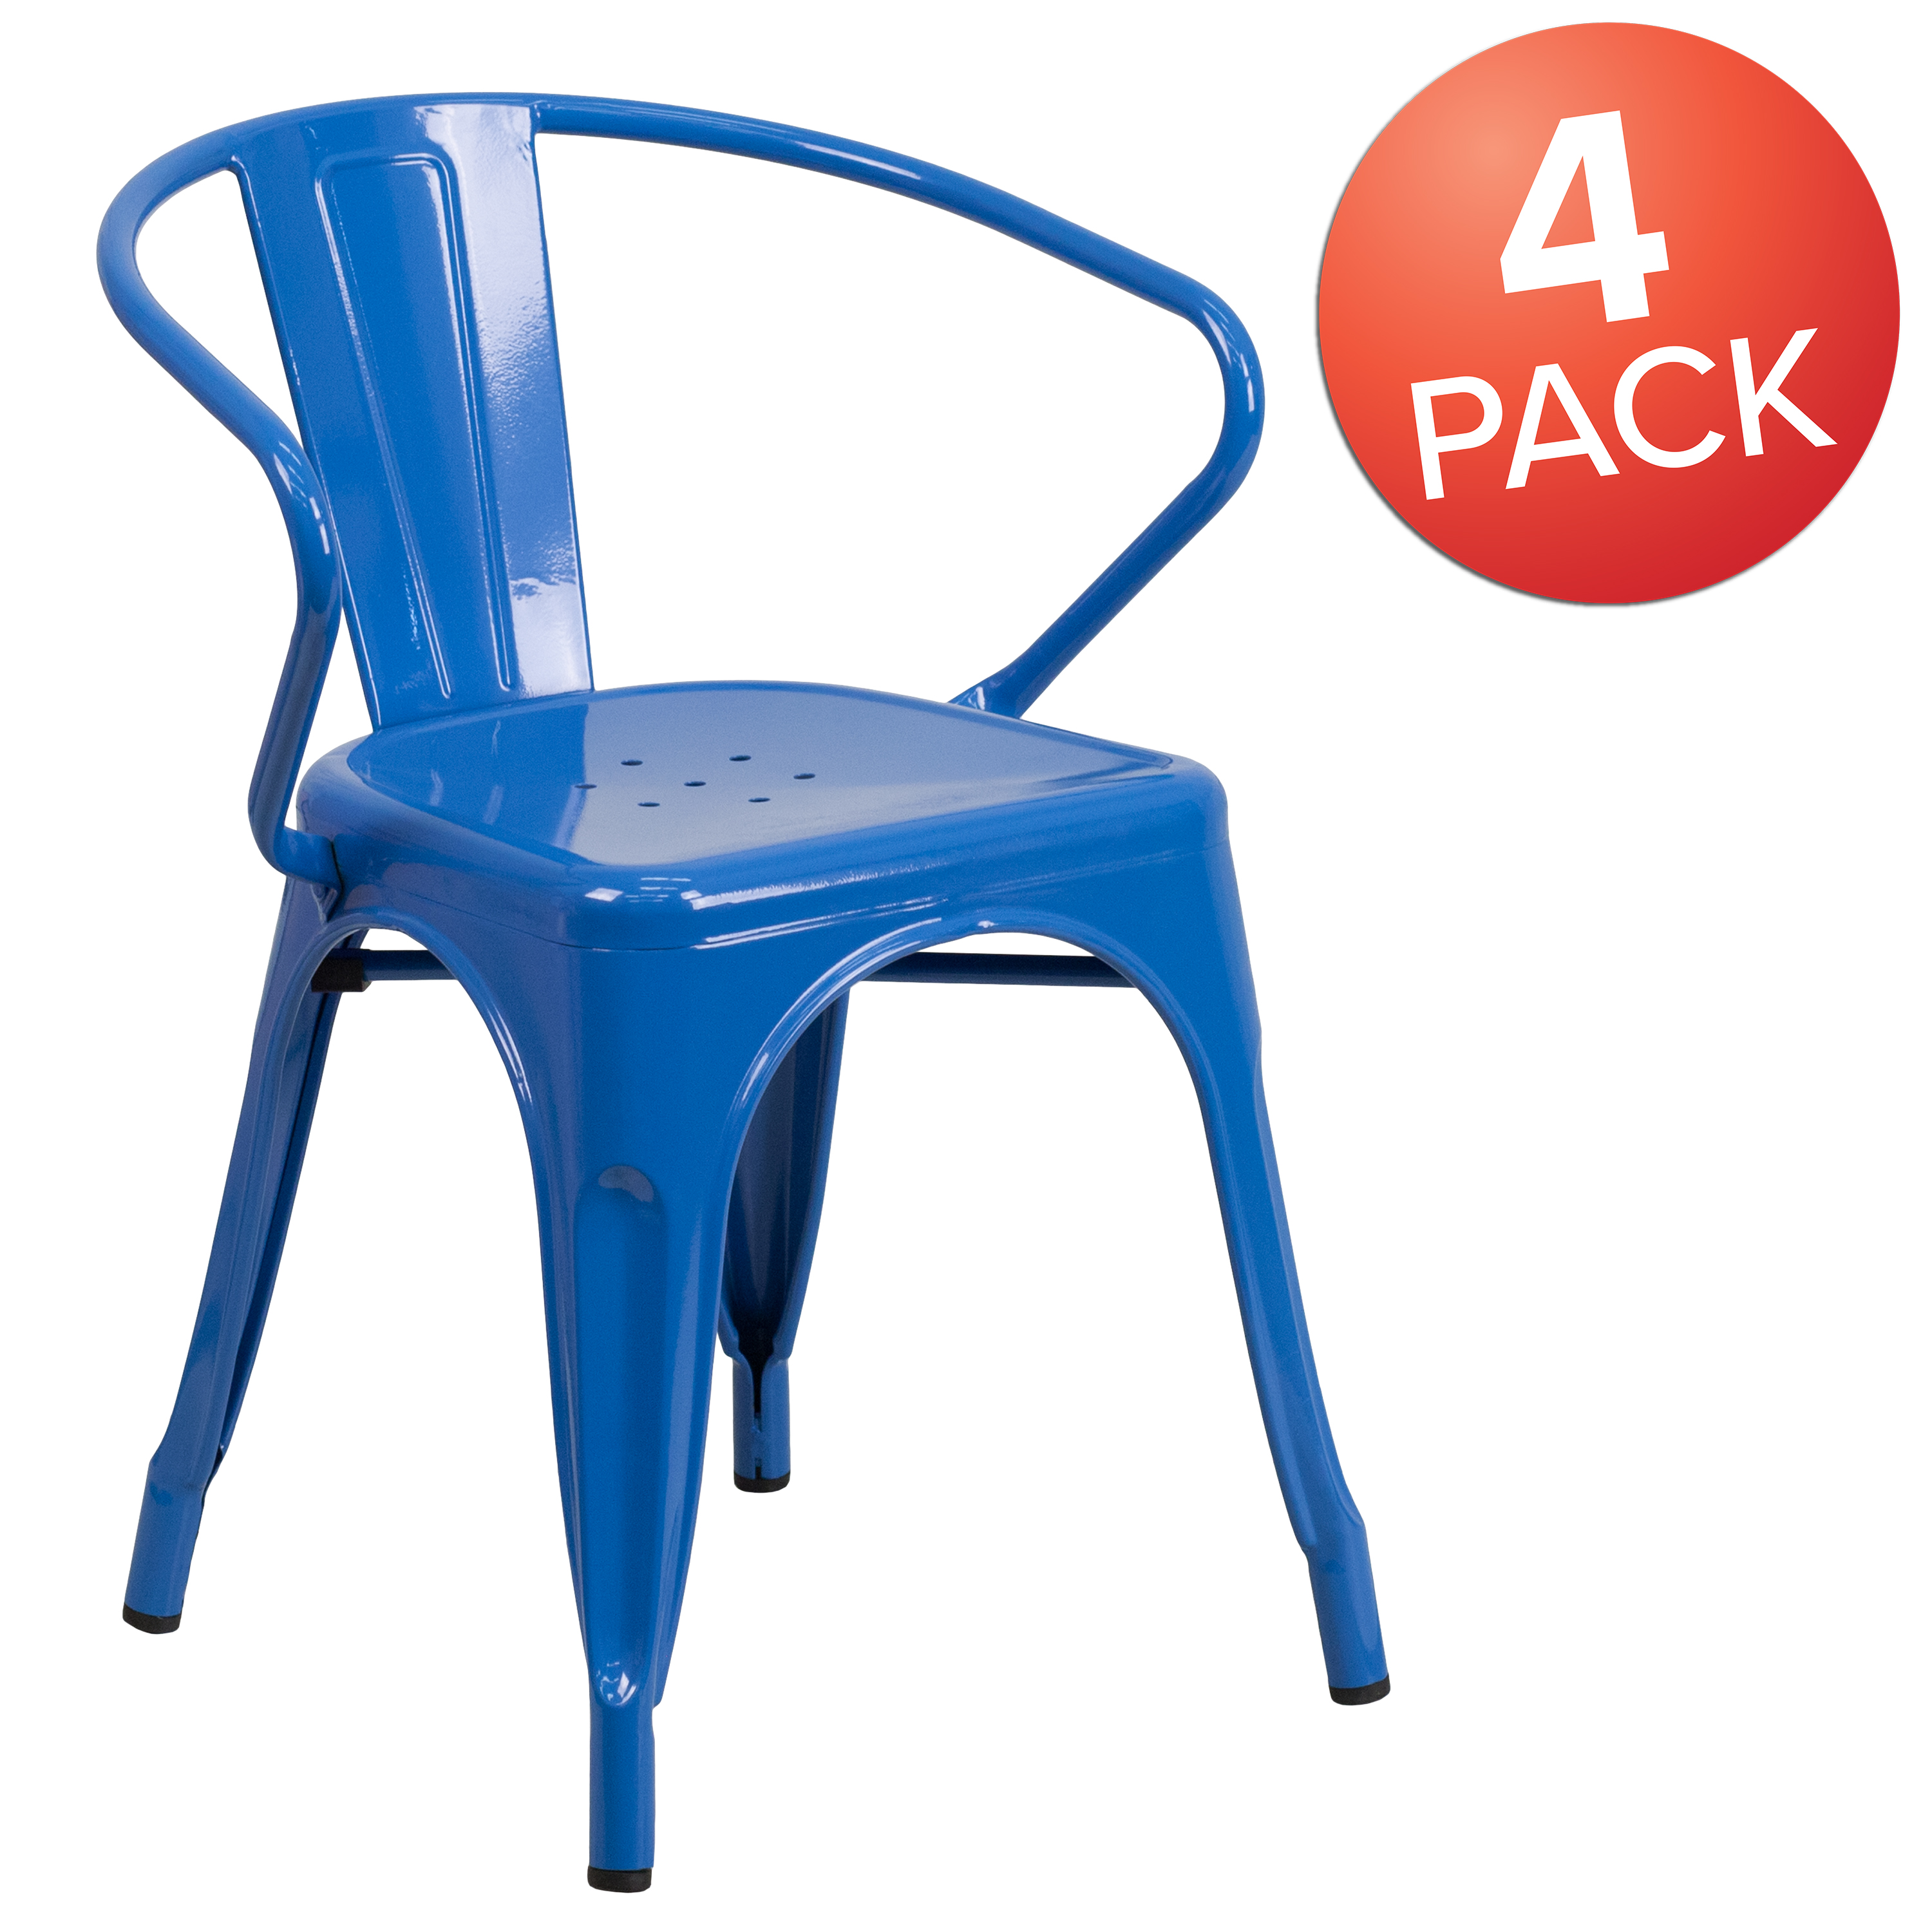 BizChair Commercial Grade 4 Pack Blue Metal Indoor-Outdoor Chair with Arms - image 3 of 14